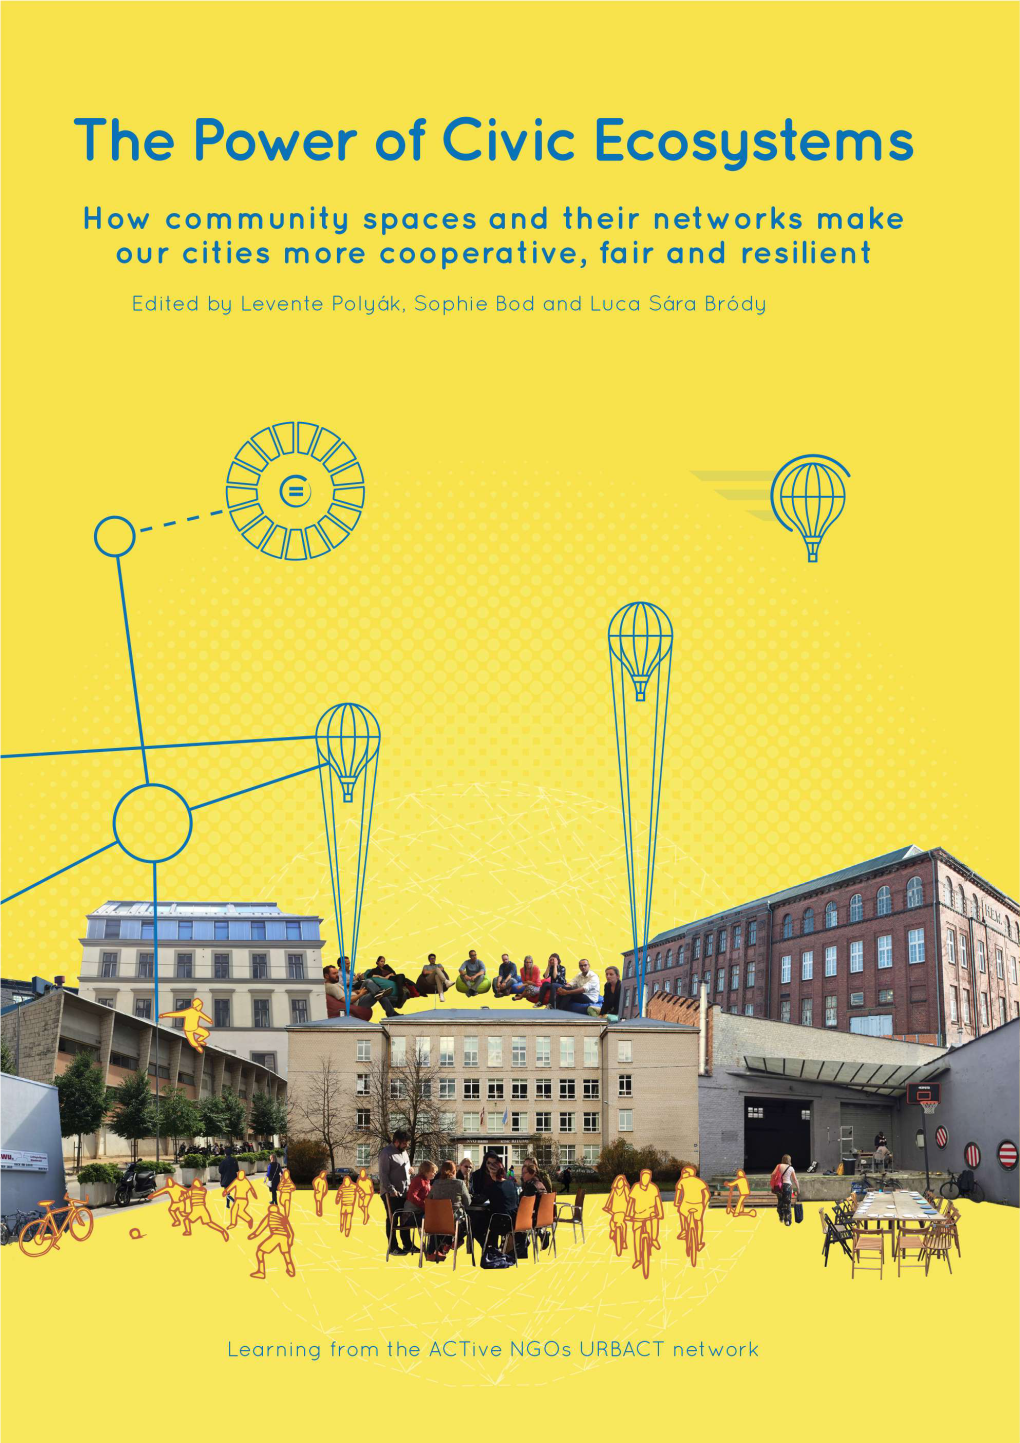 The Power of Civic Ecosystems How Community Spaces and Their Networks Make Our Cities More Cooperative, Fair and Resilient